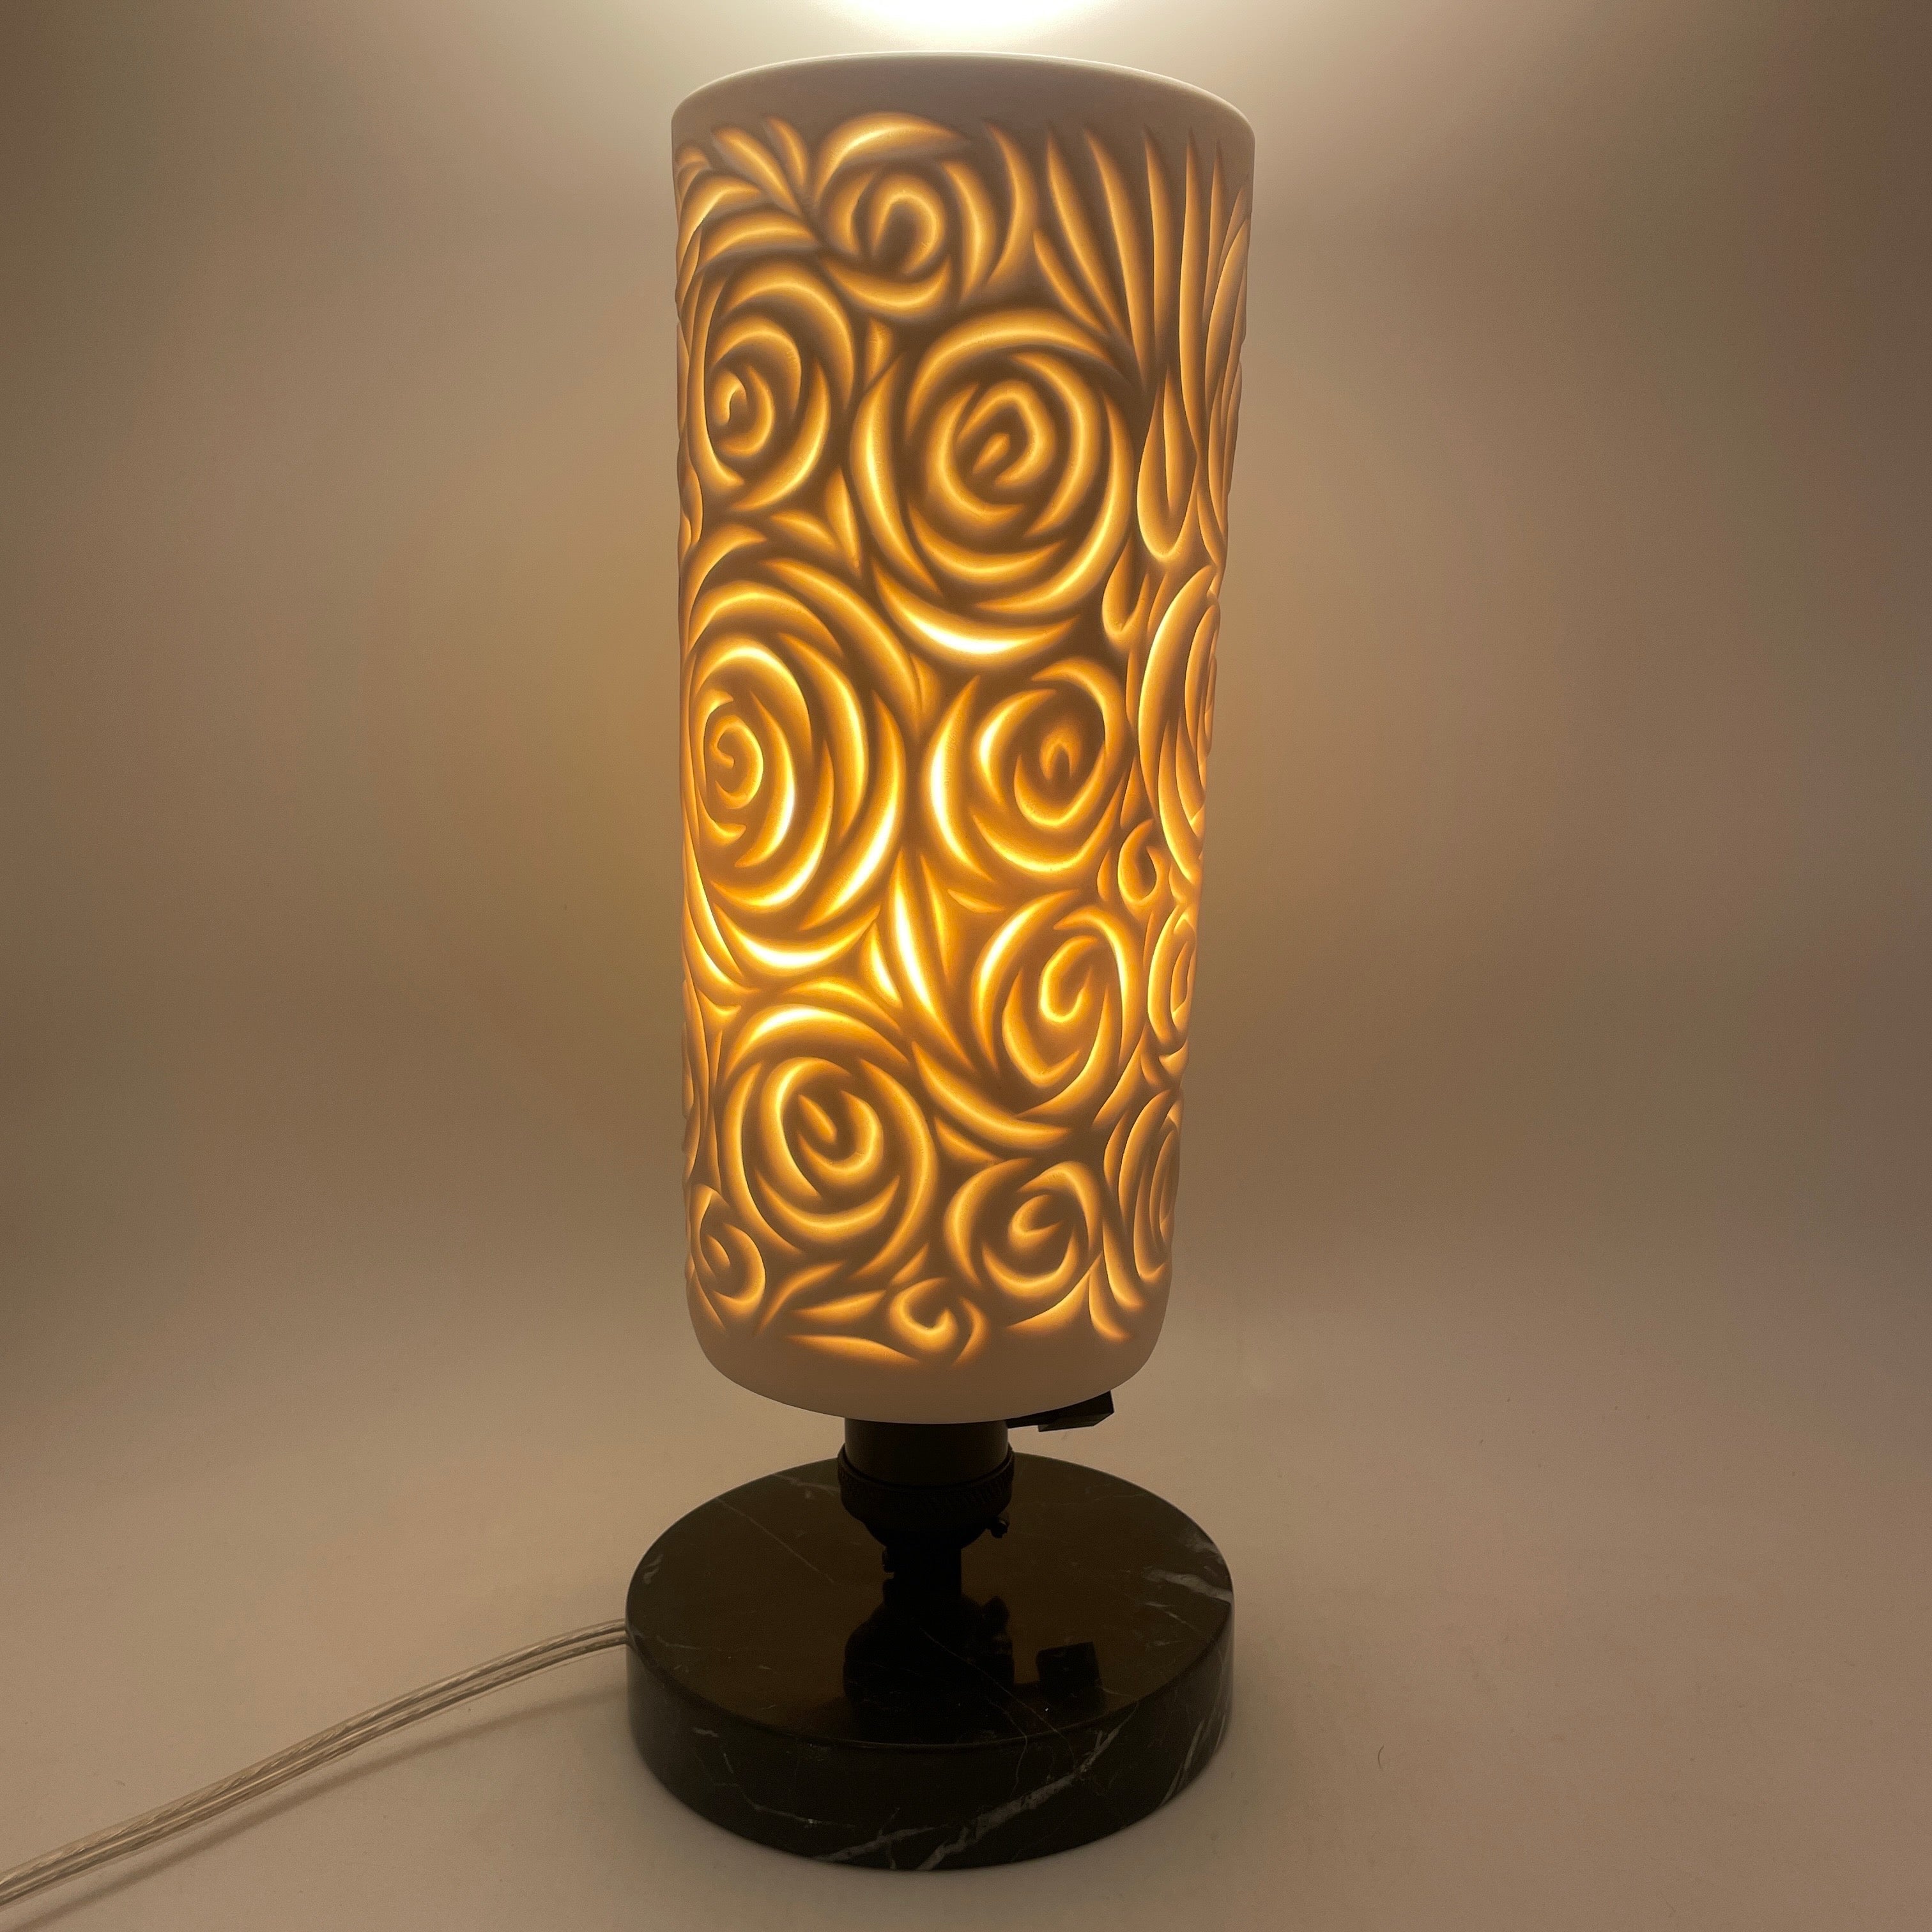 Table Lamp- “Roses” hand-carved White Porcelain Shade andChoice of Base (ready to ship)